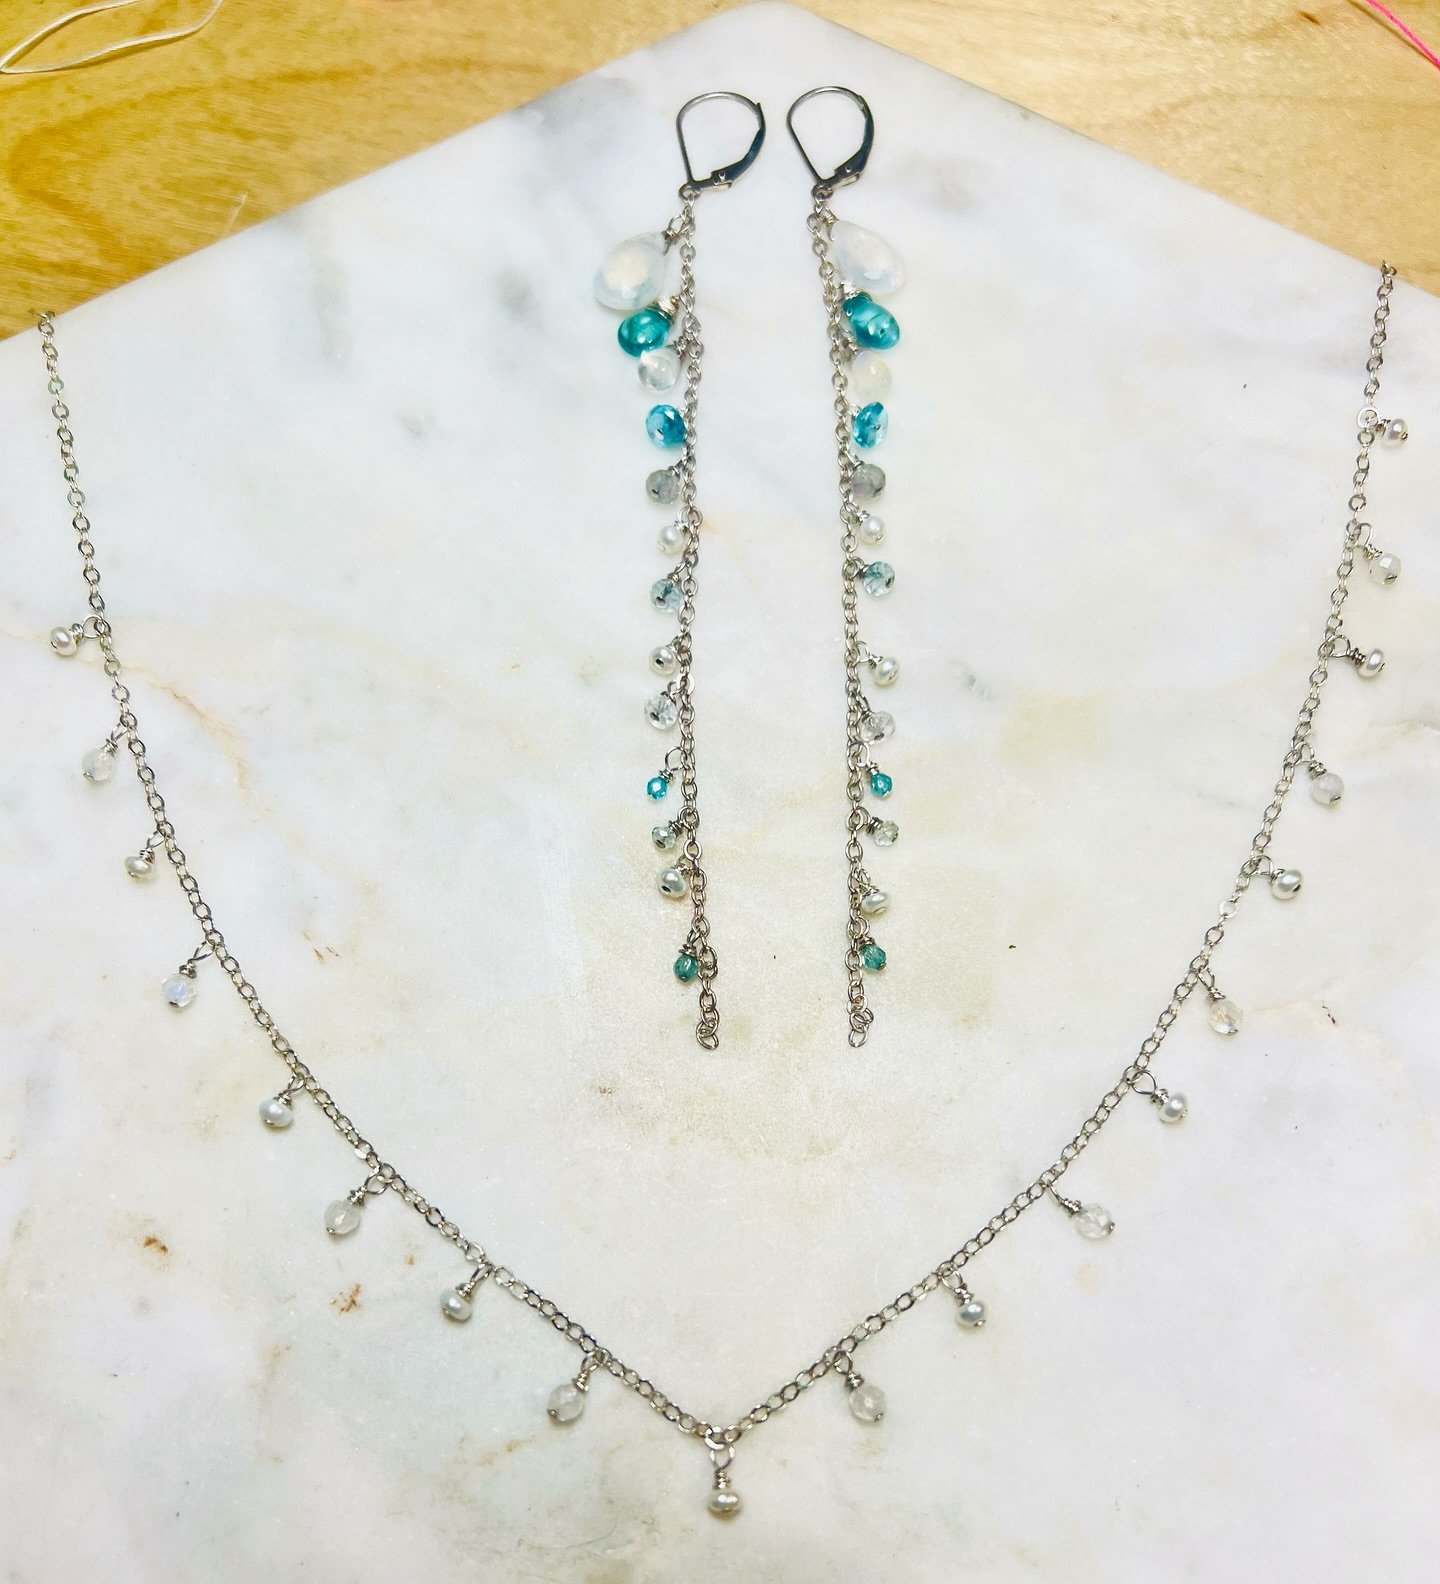 ✨ Embrace the Power of Manifestation ✨

Introducing our latest creation: Handmade with love by Lucy Hoven, our sterling silver pearl and moonstone necklace paired with dainty yet dramatic long earrings adorned with apatite accents. 💎✨

🌟 Dive into 